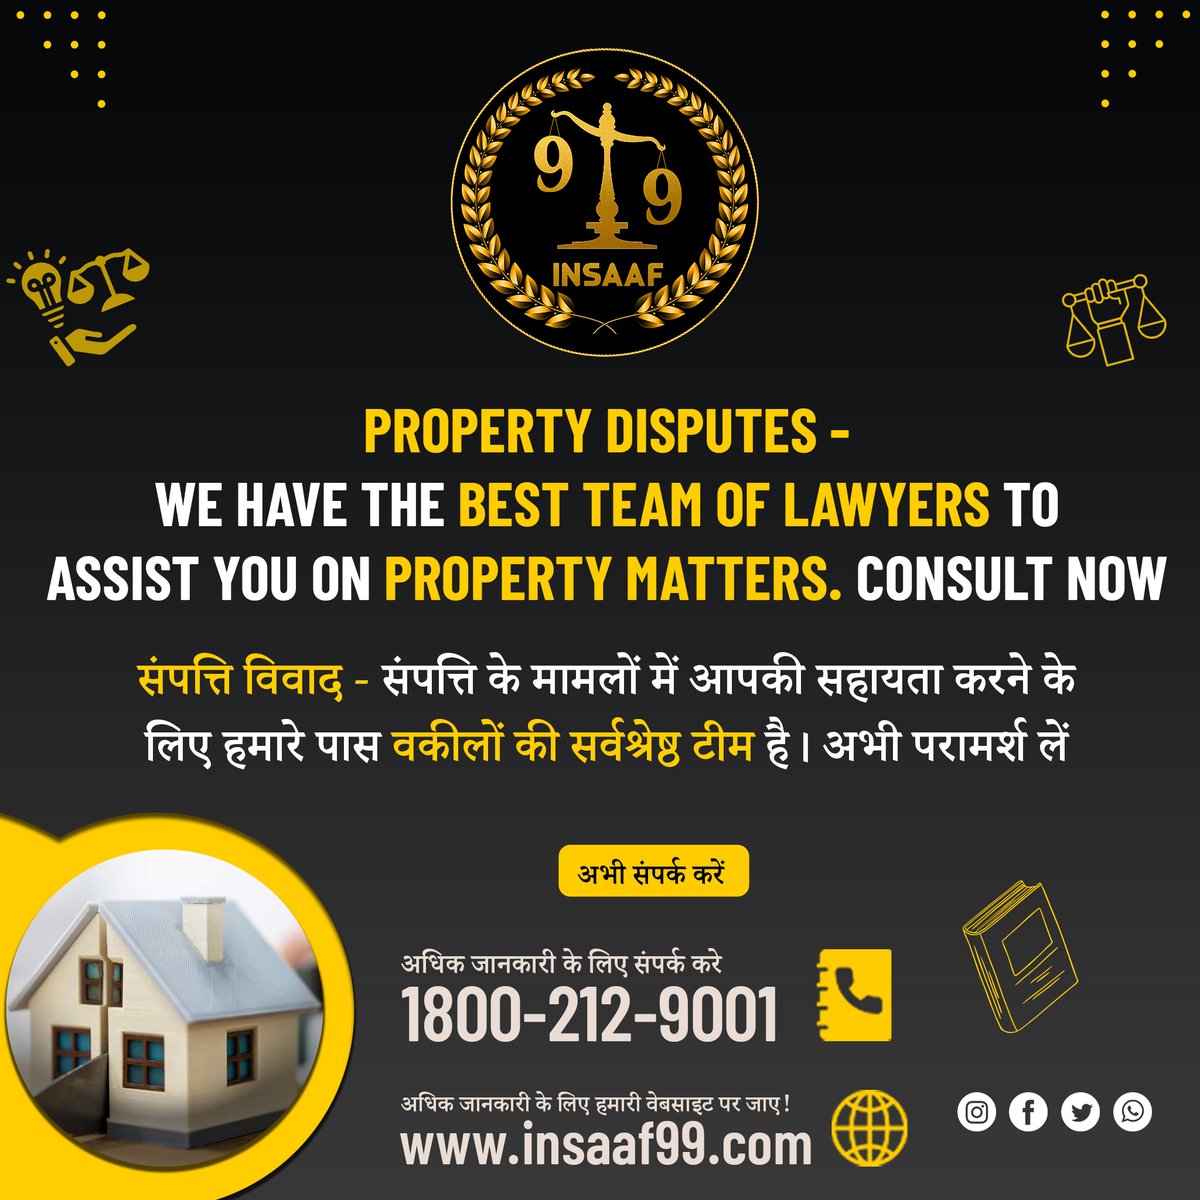 Property Disputes- We have the best team of Lawyers to assist you on Property Matters. Consult Now 
#propertydisputes #propertymatters #law #indianlawupdates #indianlawyers #Insaaf99 #indianlaws #lawyer #Advocate #VAKIL